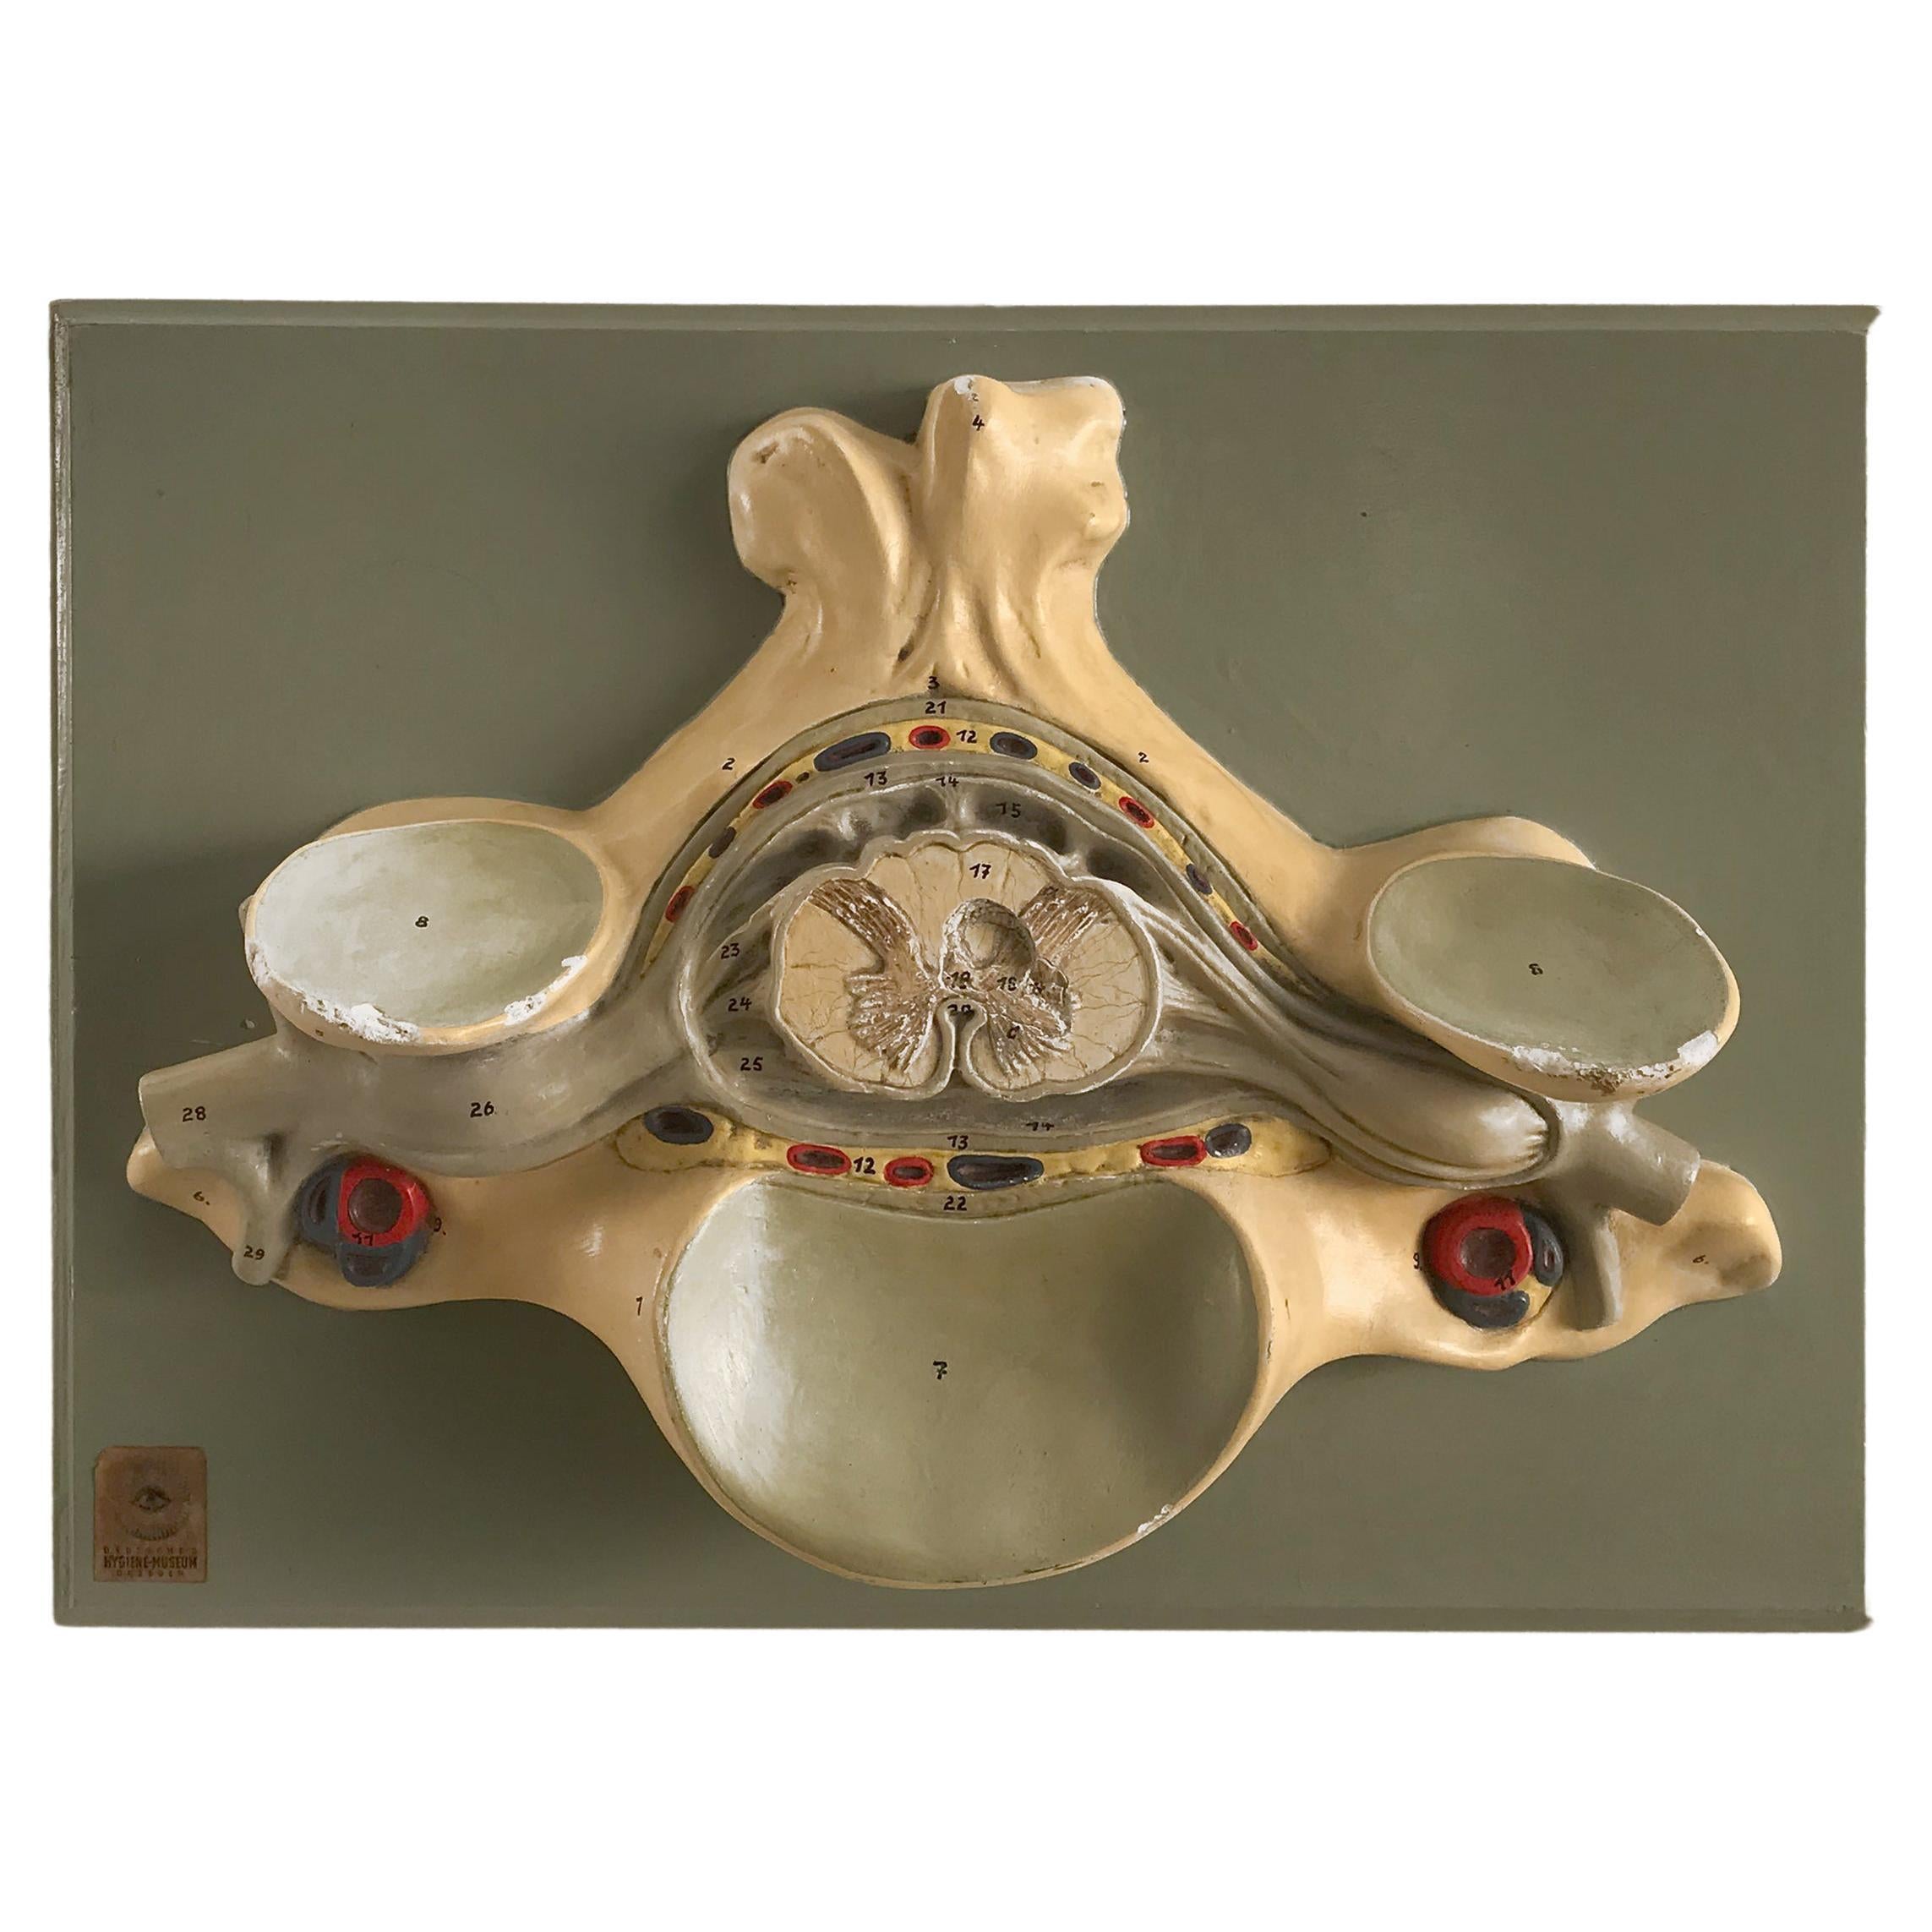 Three-Dimensional Midcentury Anatomical Wall Plaster Sculpture, Germany, 1950s